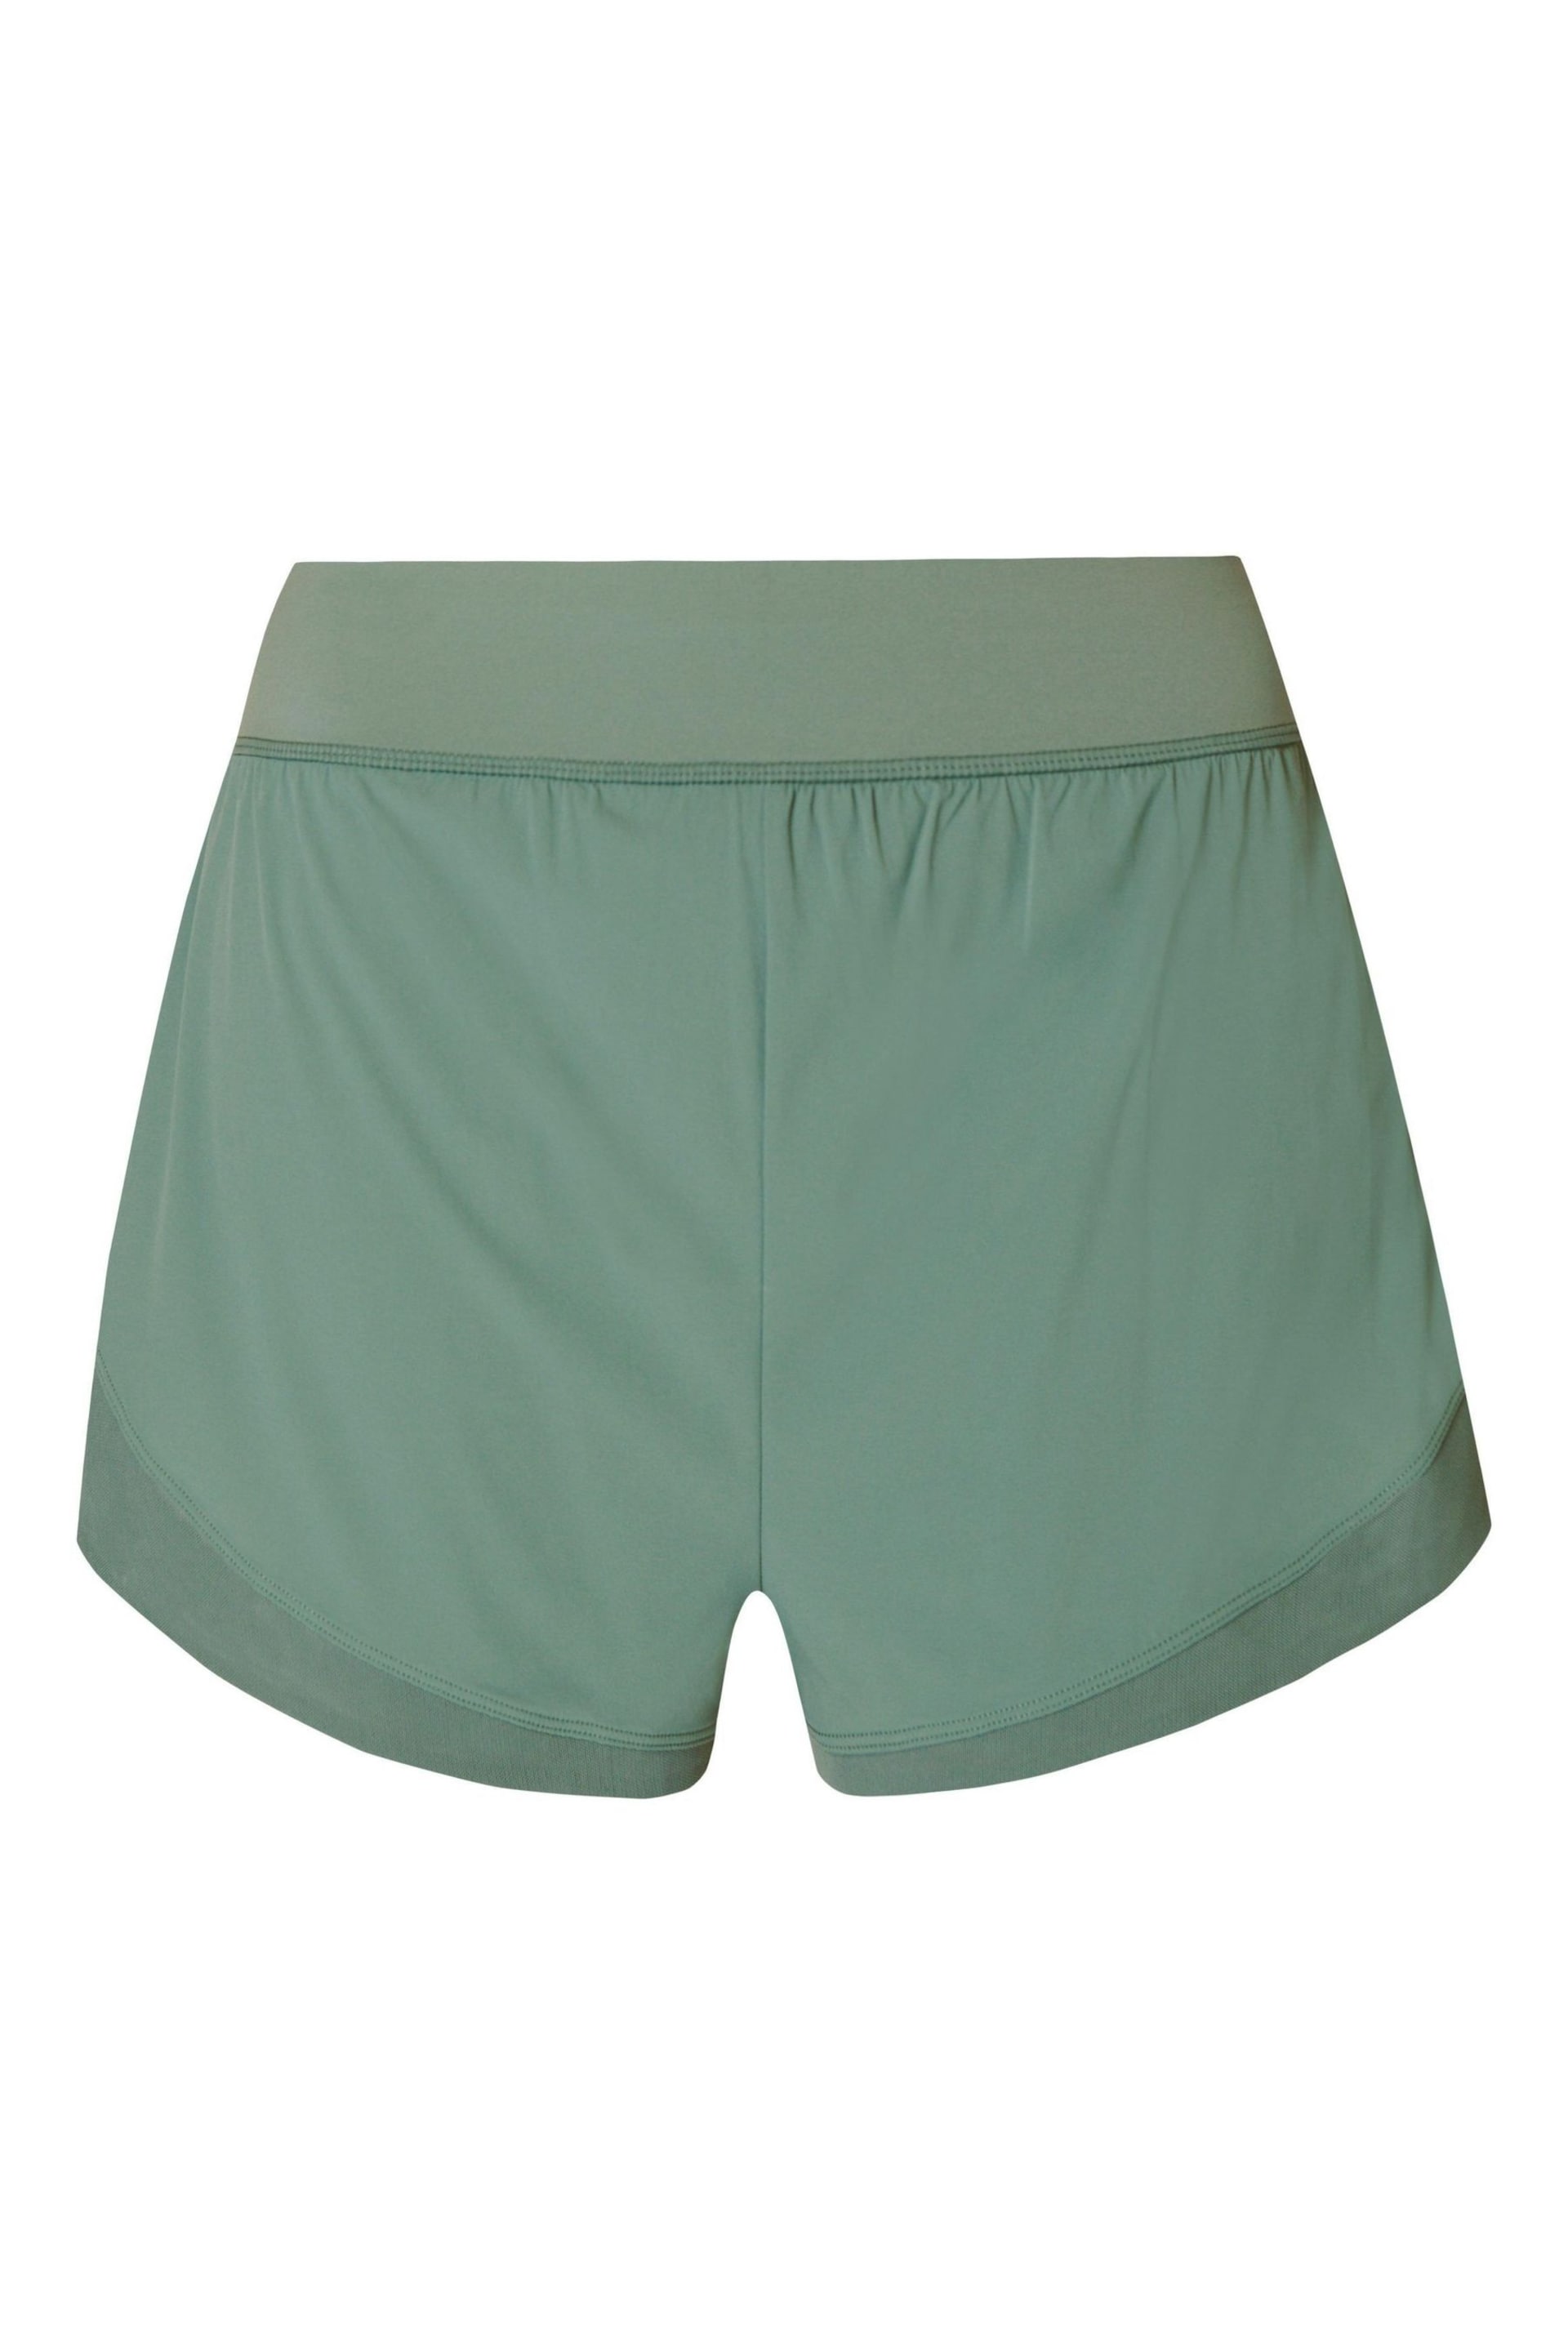 Sweaty Betty Cool Forest Green Tempo Run Shorts - Image 9 of 9